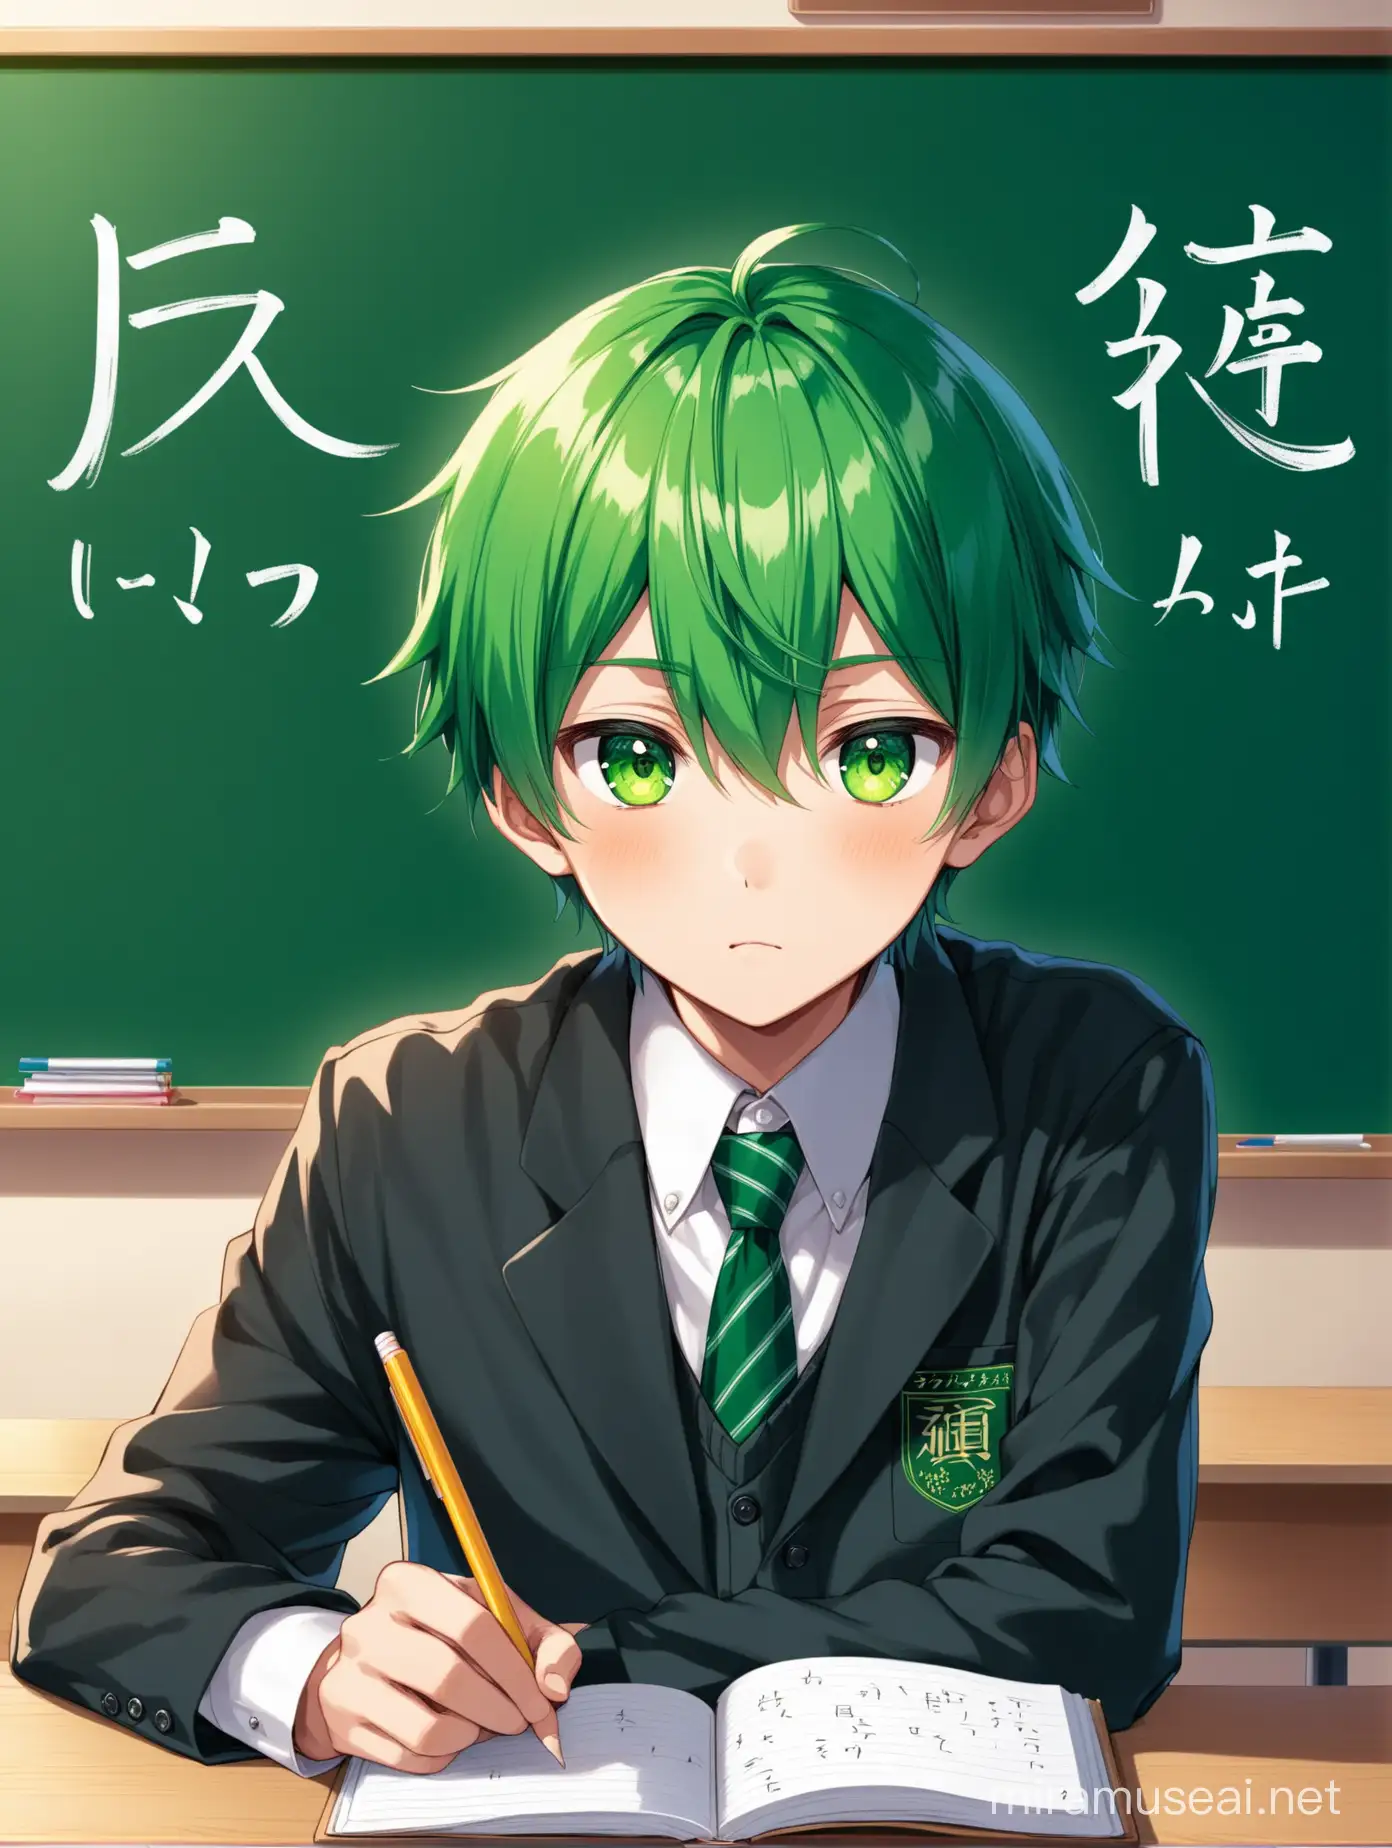 teenage boy. With bad boy green hair cut. He wears a school uniform. He has a big green eyes. in school and sitting at a table, with a green blackboard in the background and the writing on it in Japanese.